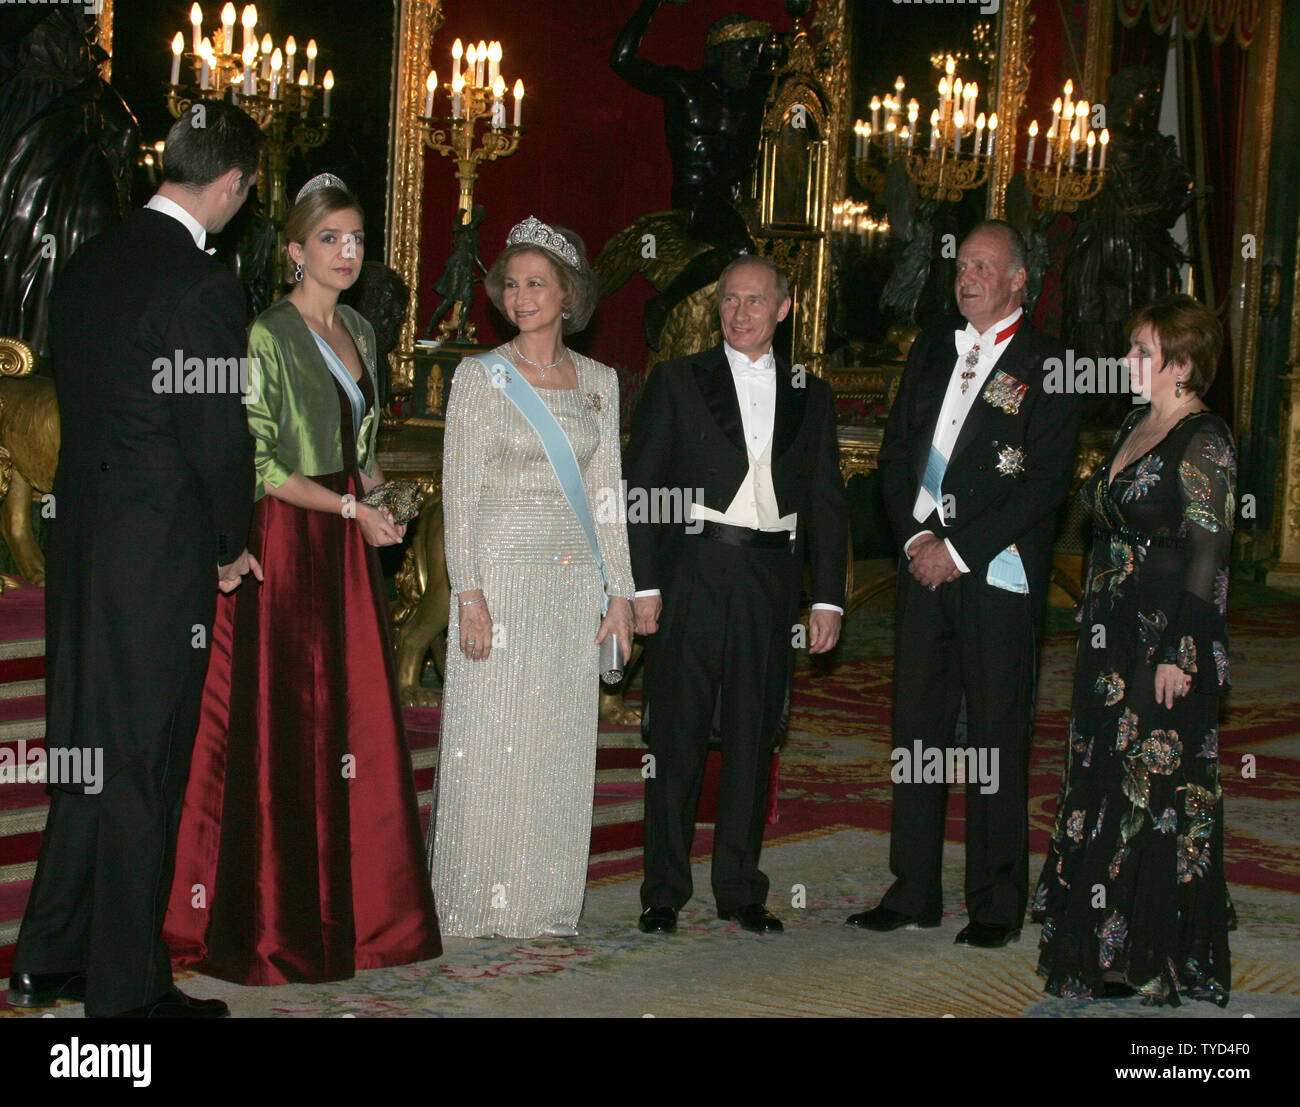 From left to right: Spanish Prince Inaki Urdangarin, his wife Cristina, Queen Sofia, Russian President Vladimir Putin, King Juan Carlos and Russian first lady Lyudmila Putin pose for a photo before their private dinner at Royal Palace in Madrid, February 8, 2006. Putin is in Spain on a two-day state visit to discuss  international terrorism and Russian cooperation with international organizations to prevent terrorism. (UPI Photo/Anatoli Zhdanov) Stock Photo